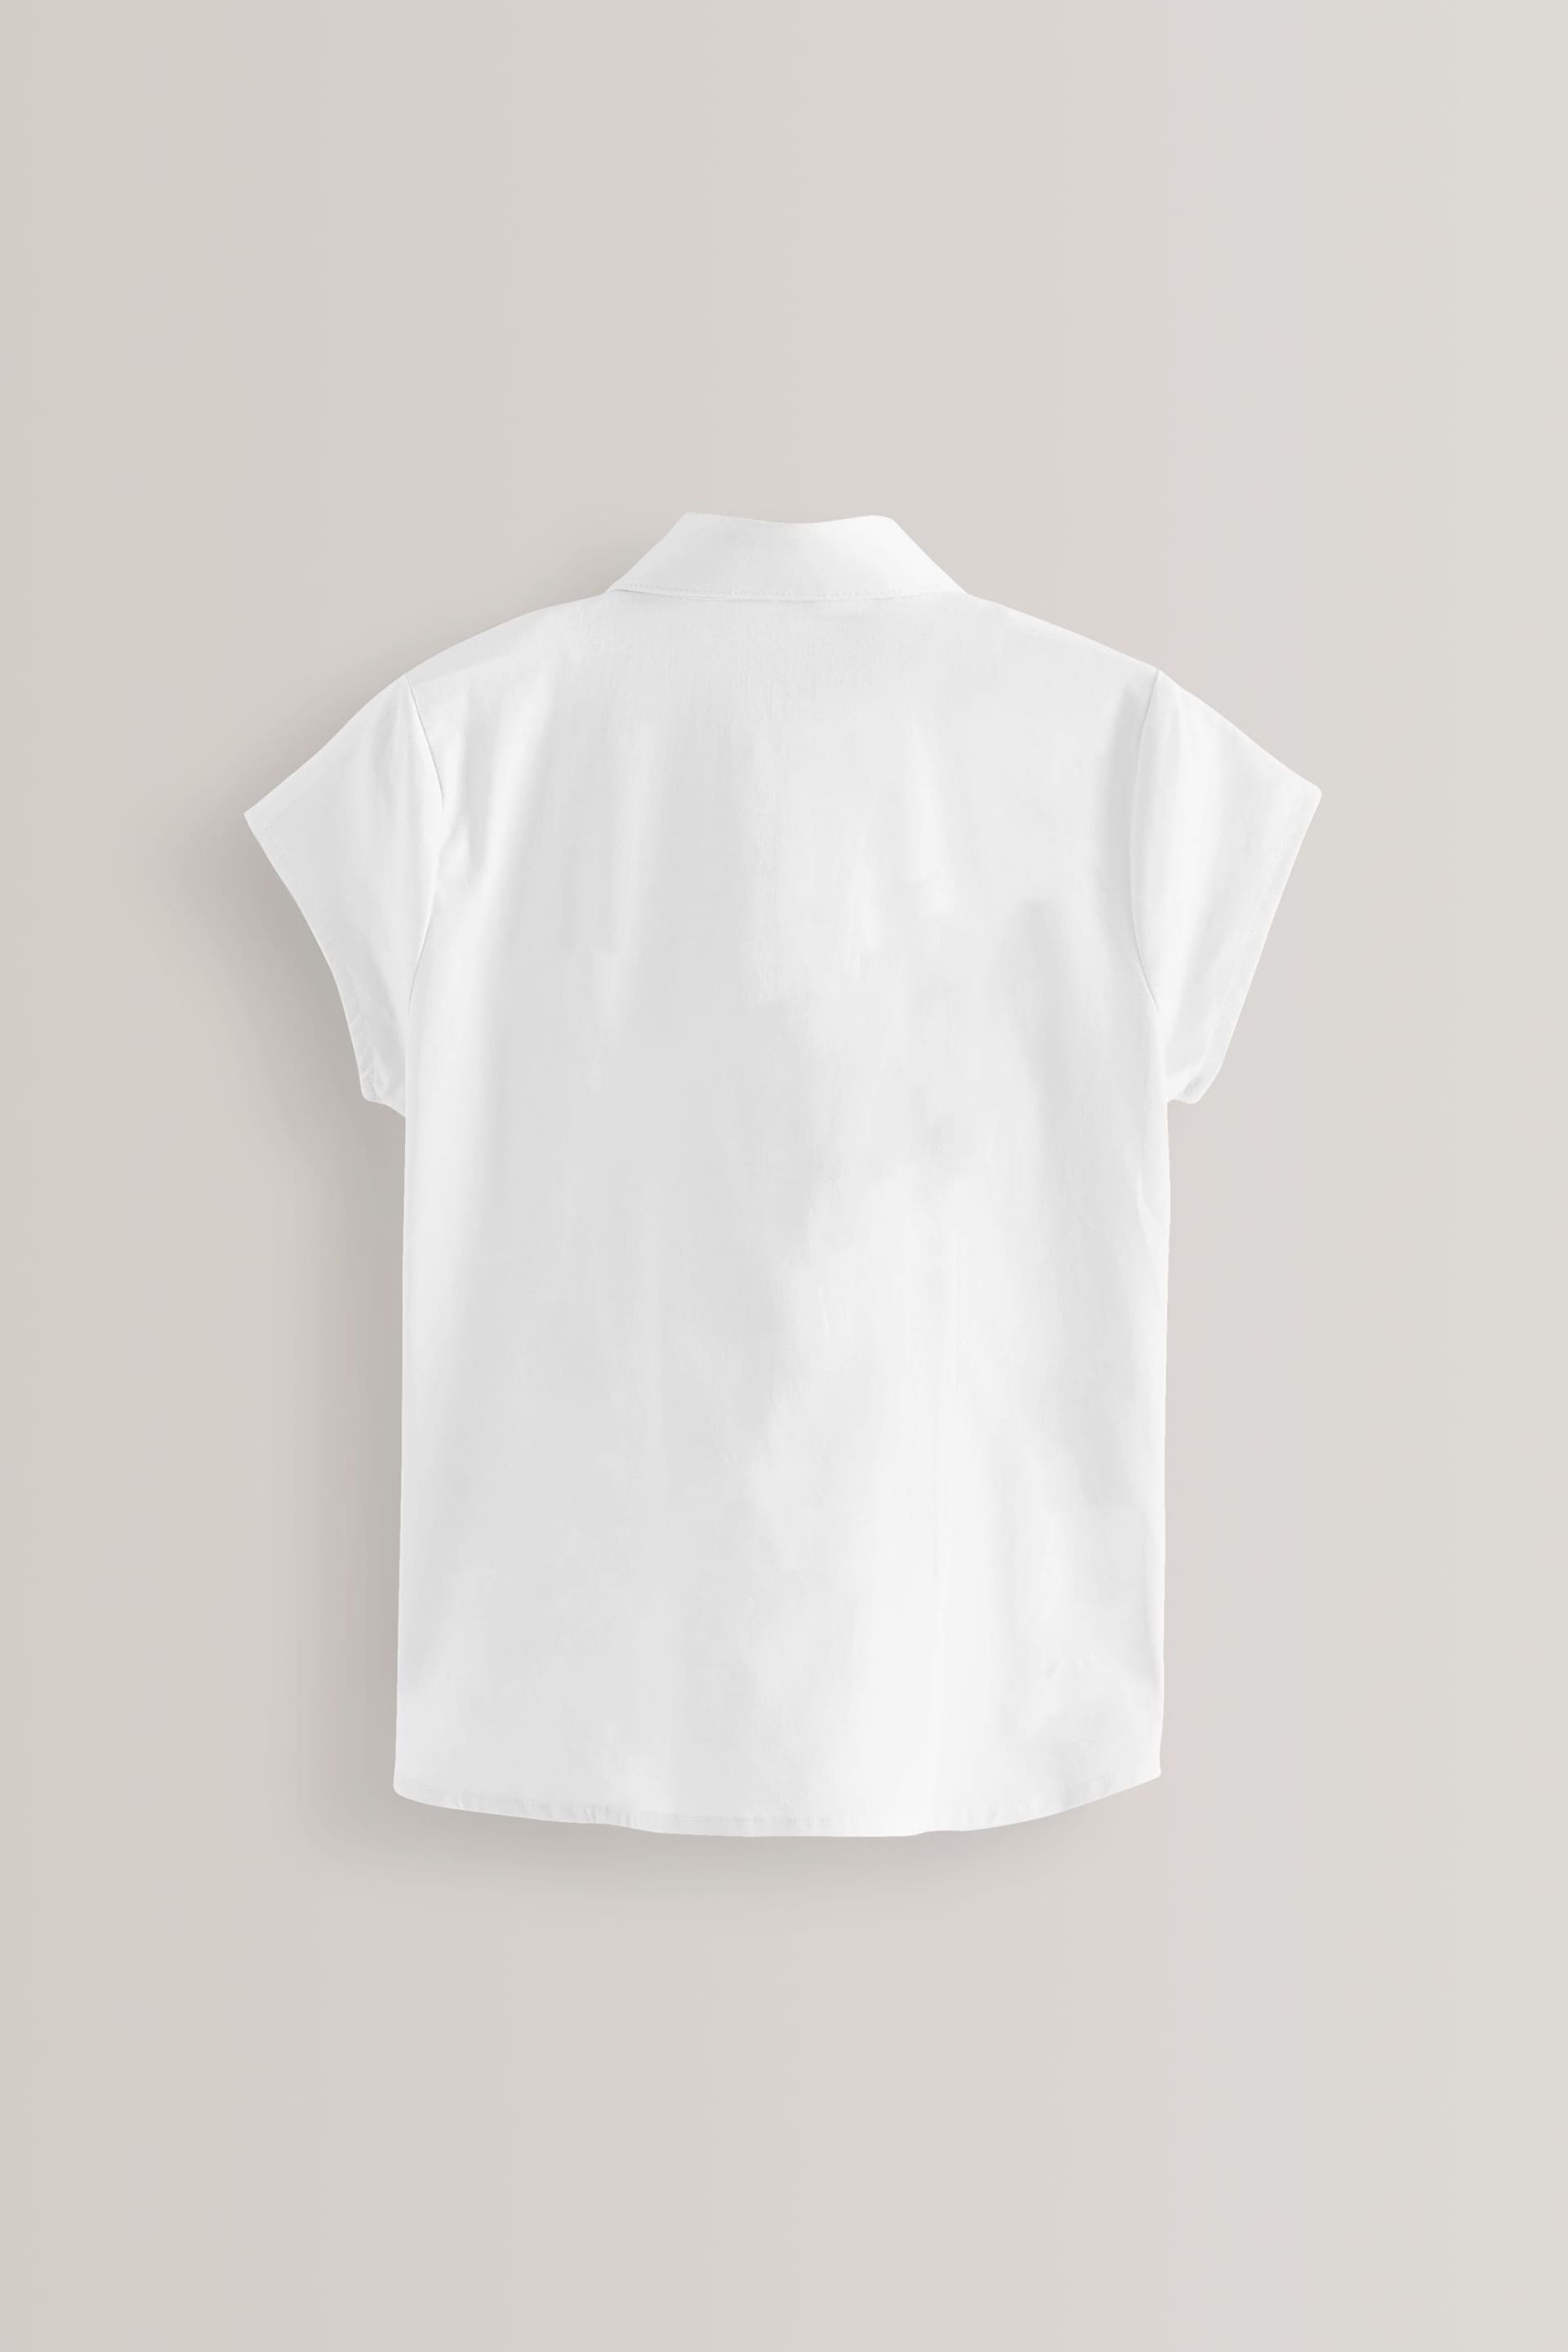 White 2 Pack Fitted Short Sleeve Cotton Rich Stretch Premium School Shirts (3-18yrs) - Image 3 of 6